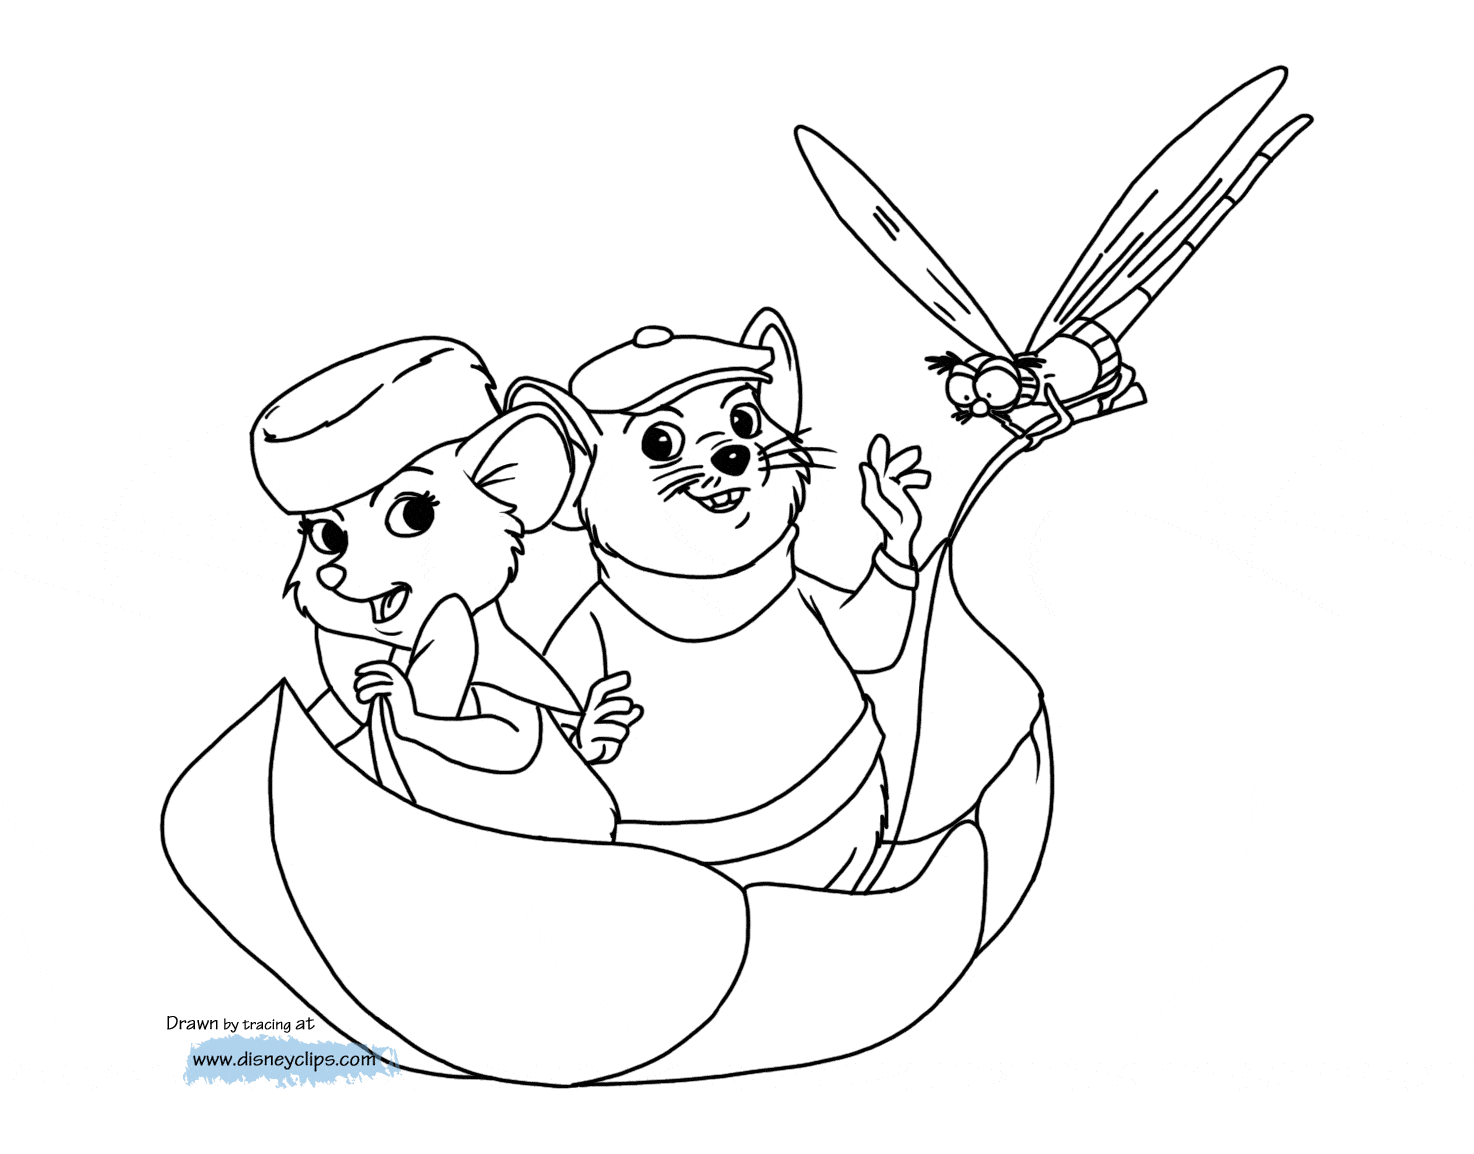 The Rescuers Coloring Pages | Disneyclips.com